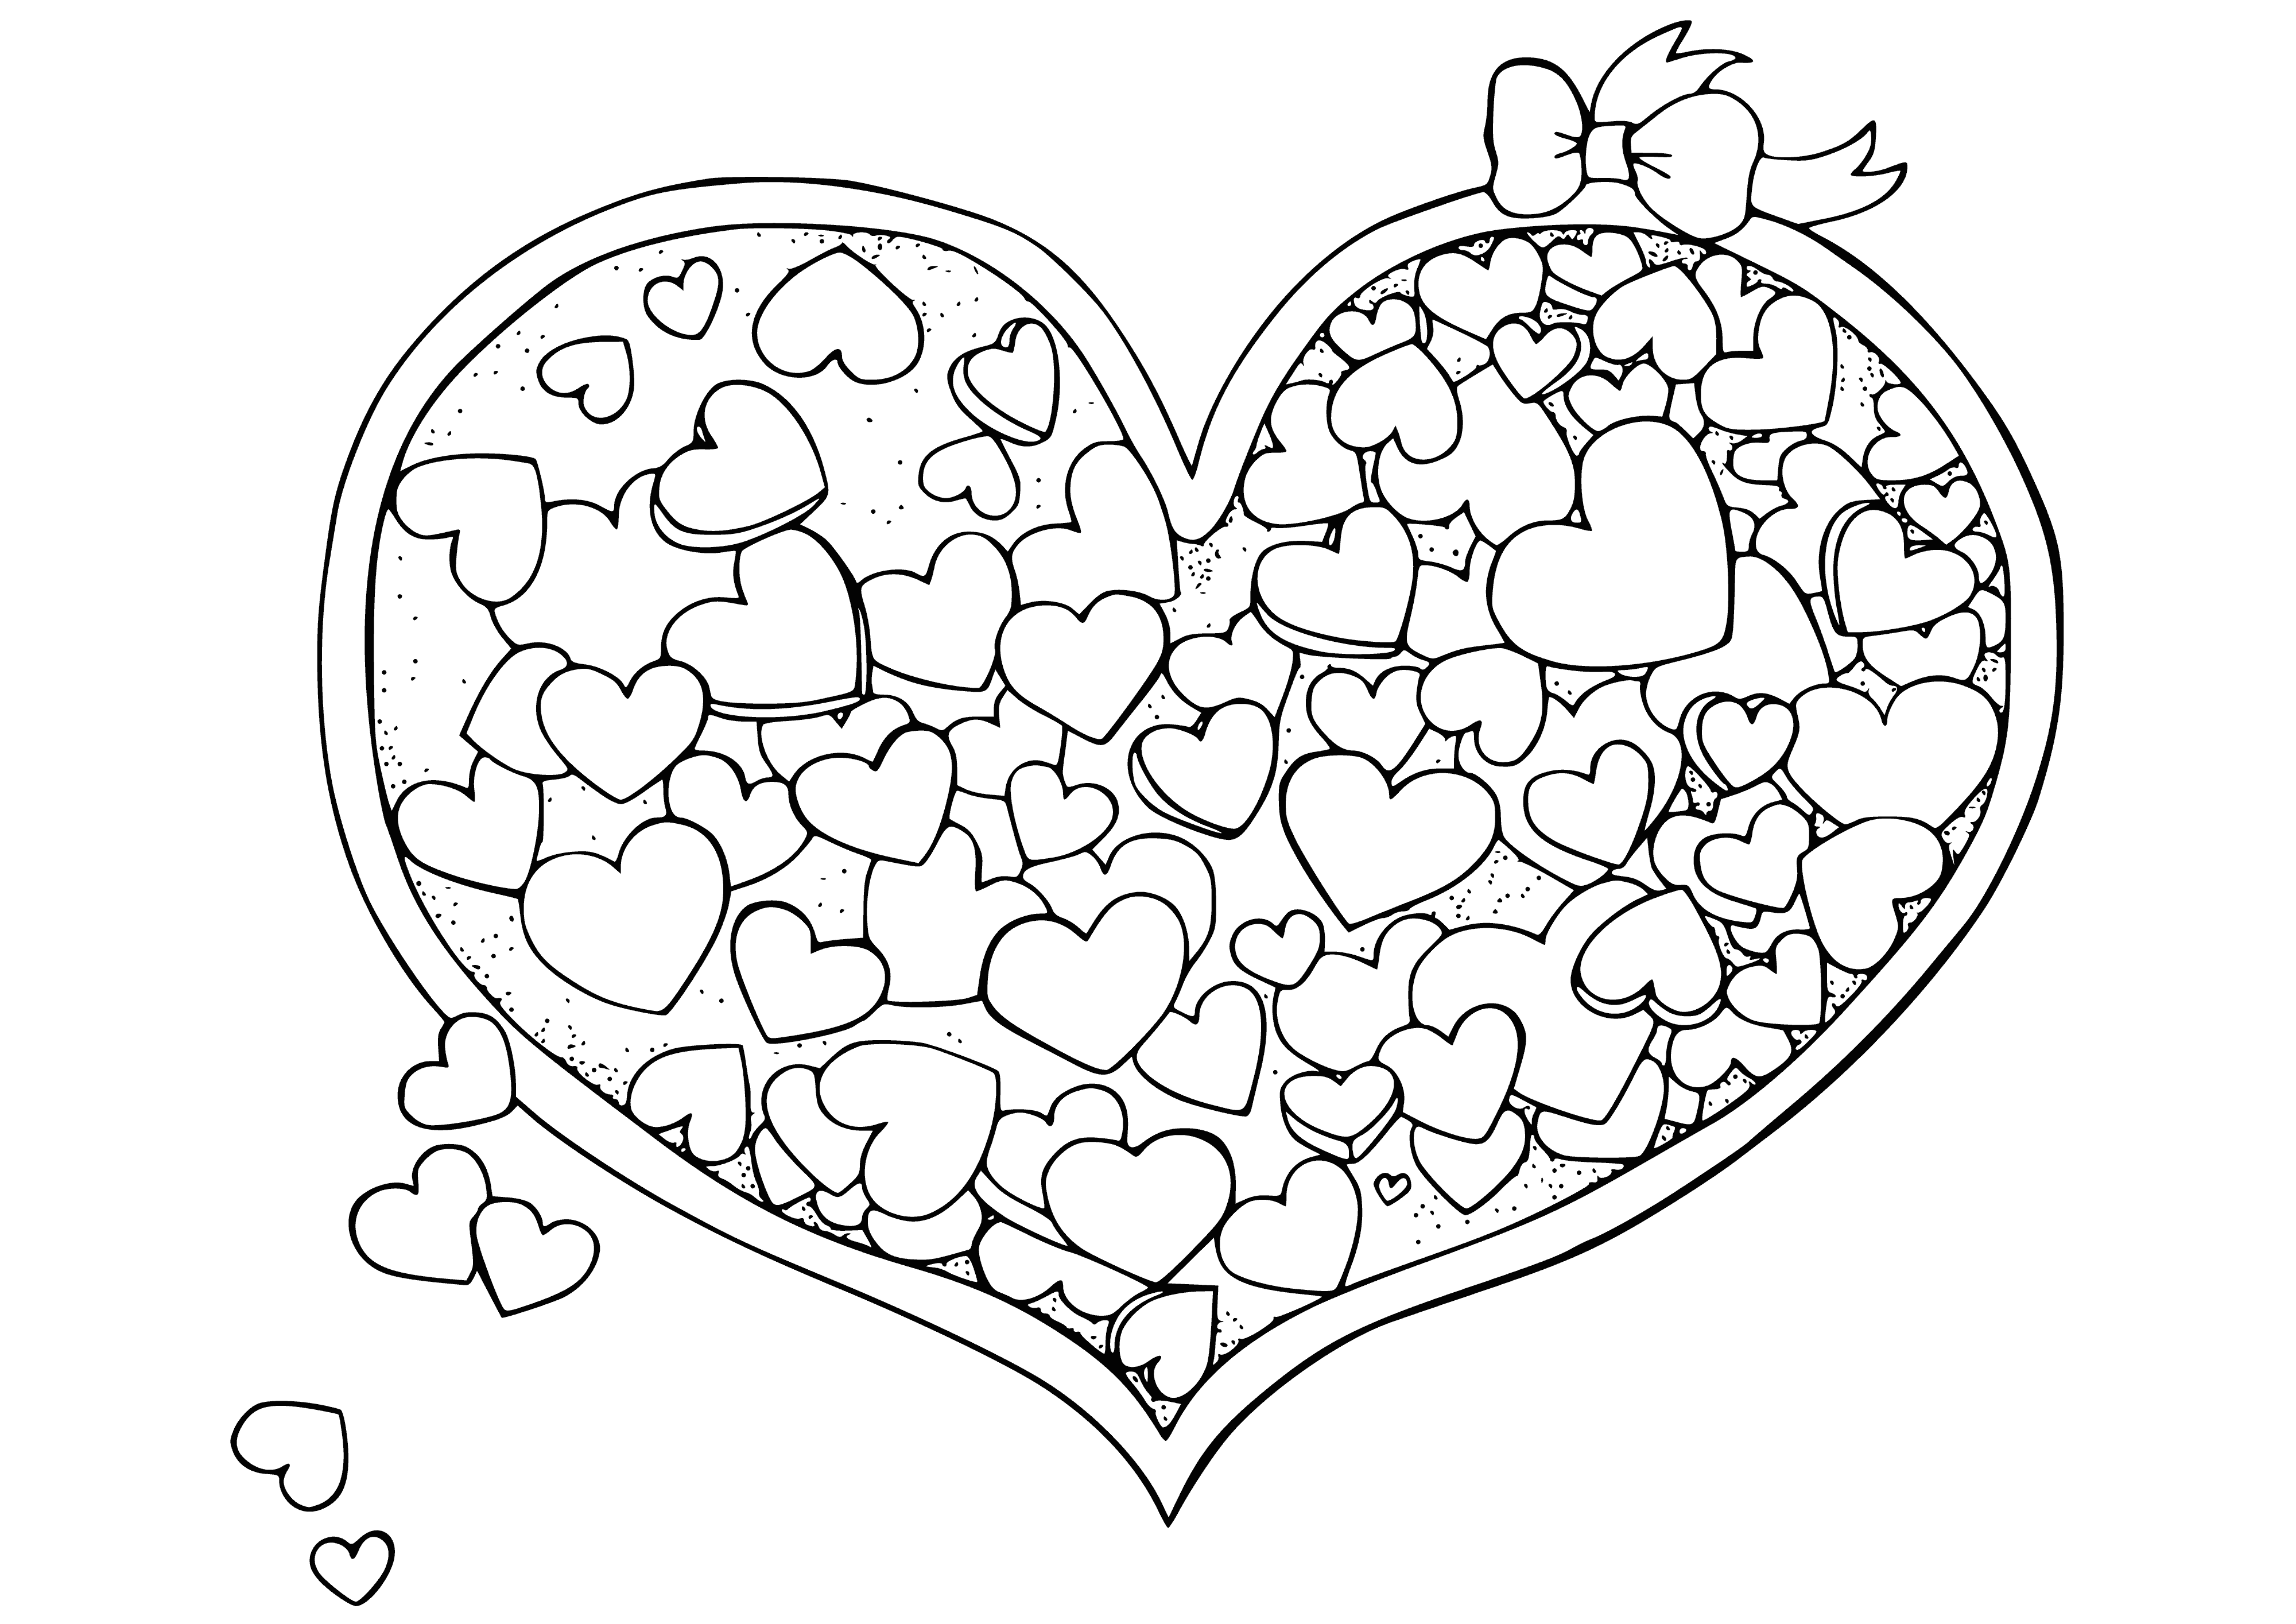 coloring page: Holding hands creates a heart shape: symbolizing love & care.